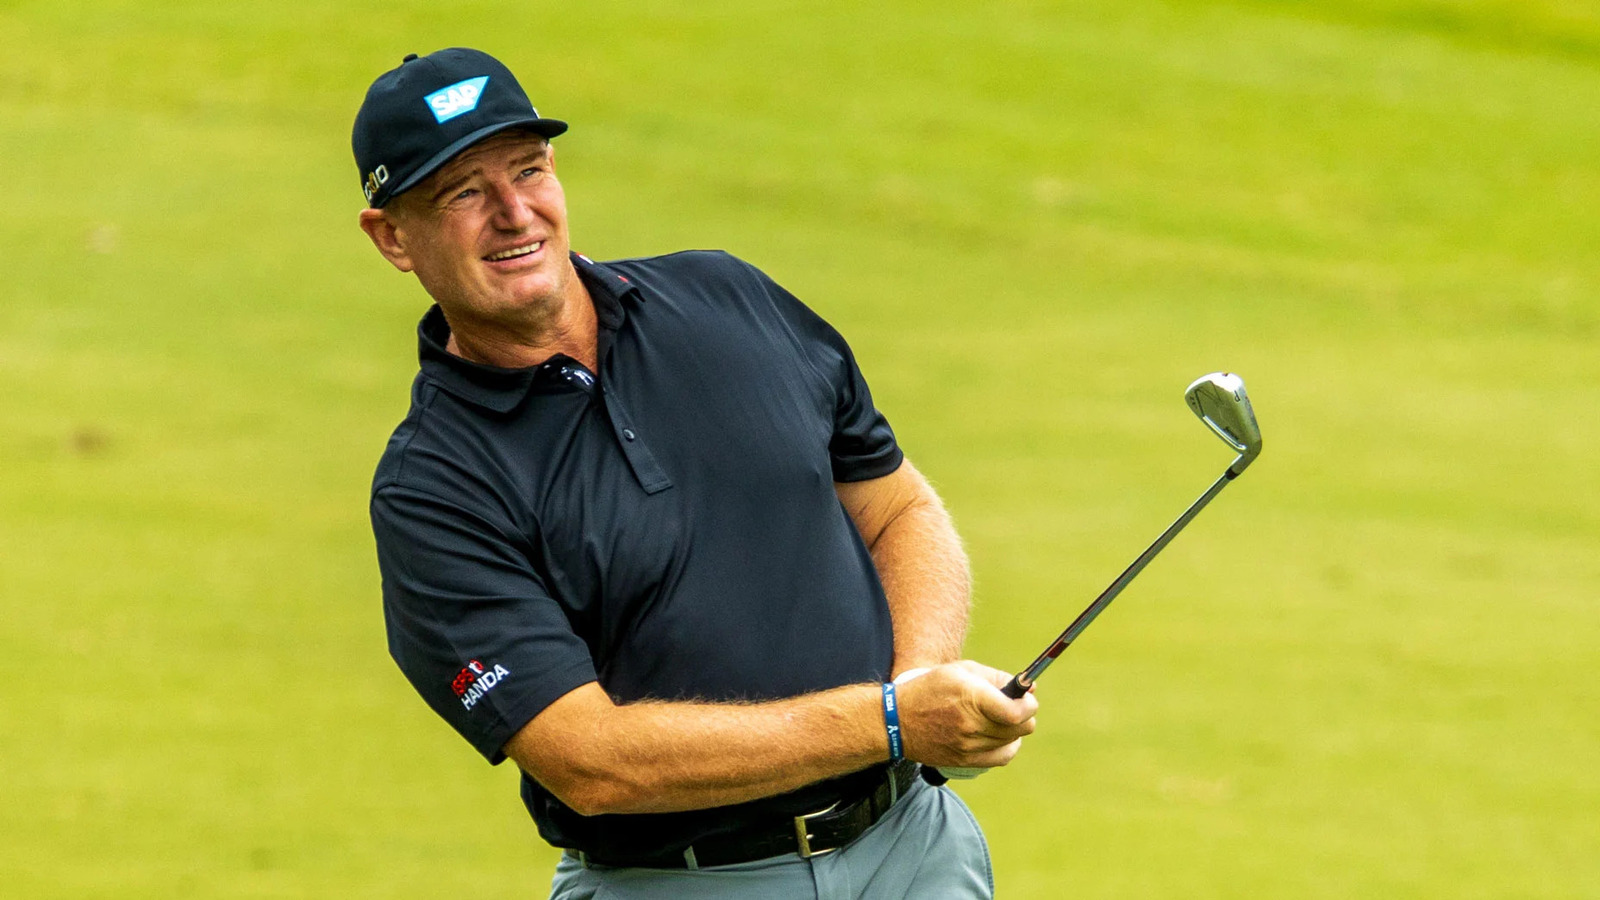 13-astonishing-facts-about-ernie-els